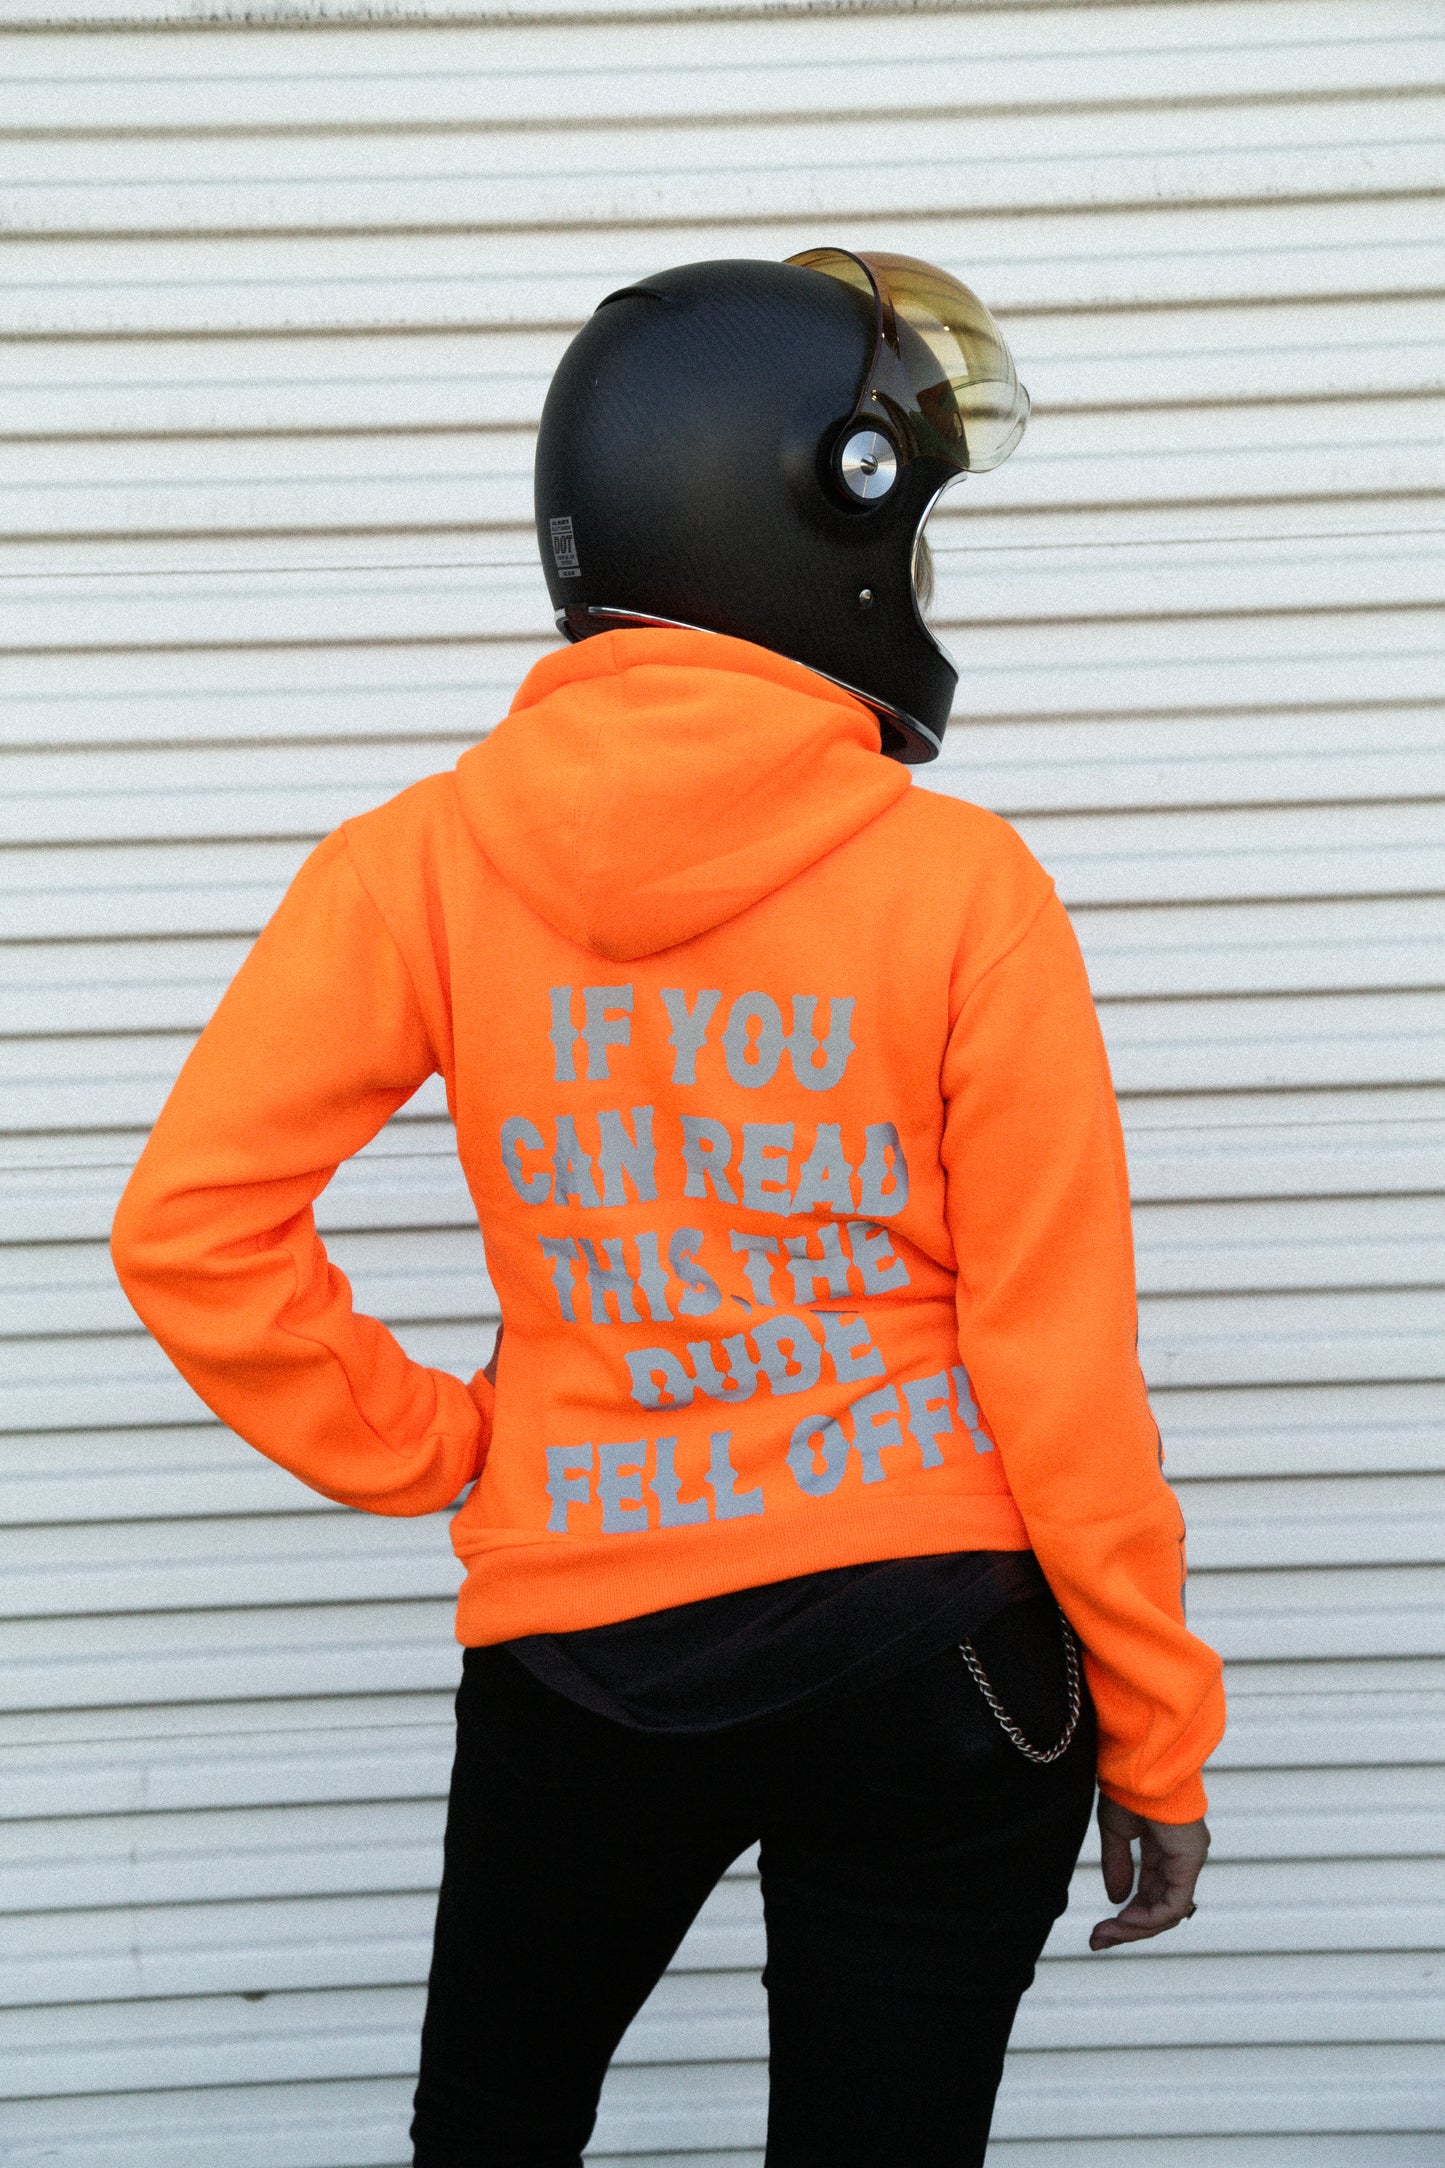 Axel Co Safety Orange "The Dude Fell Off" Motorcycle Hoodie